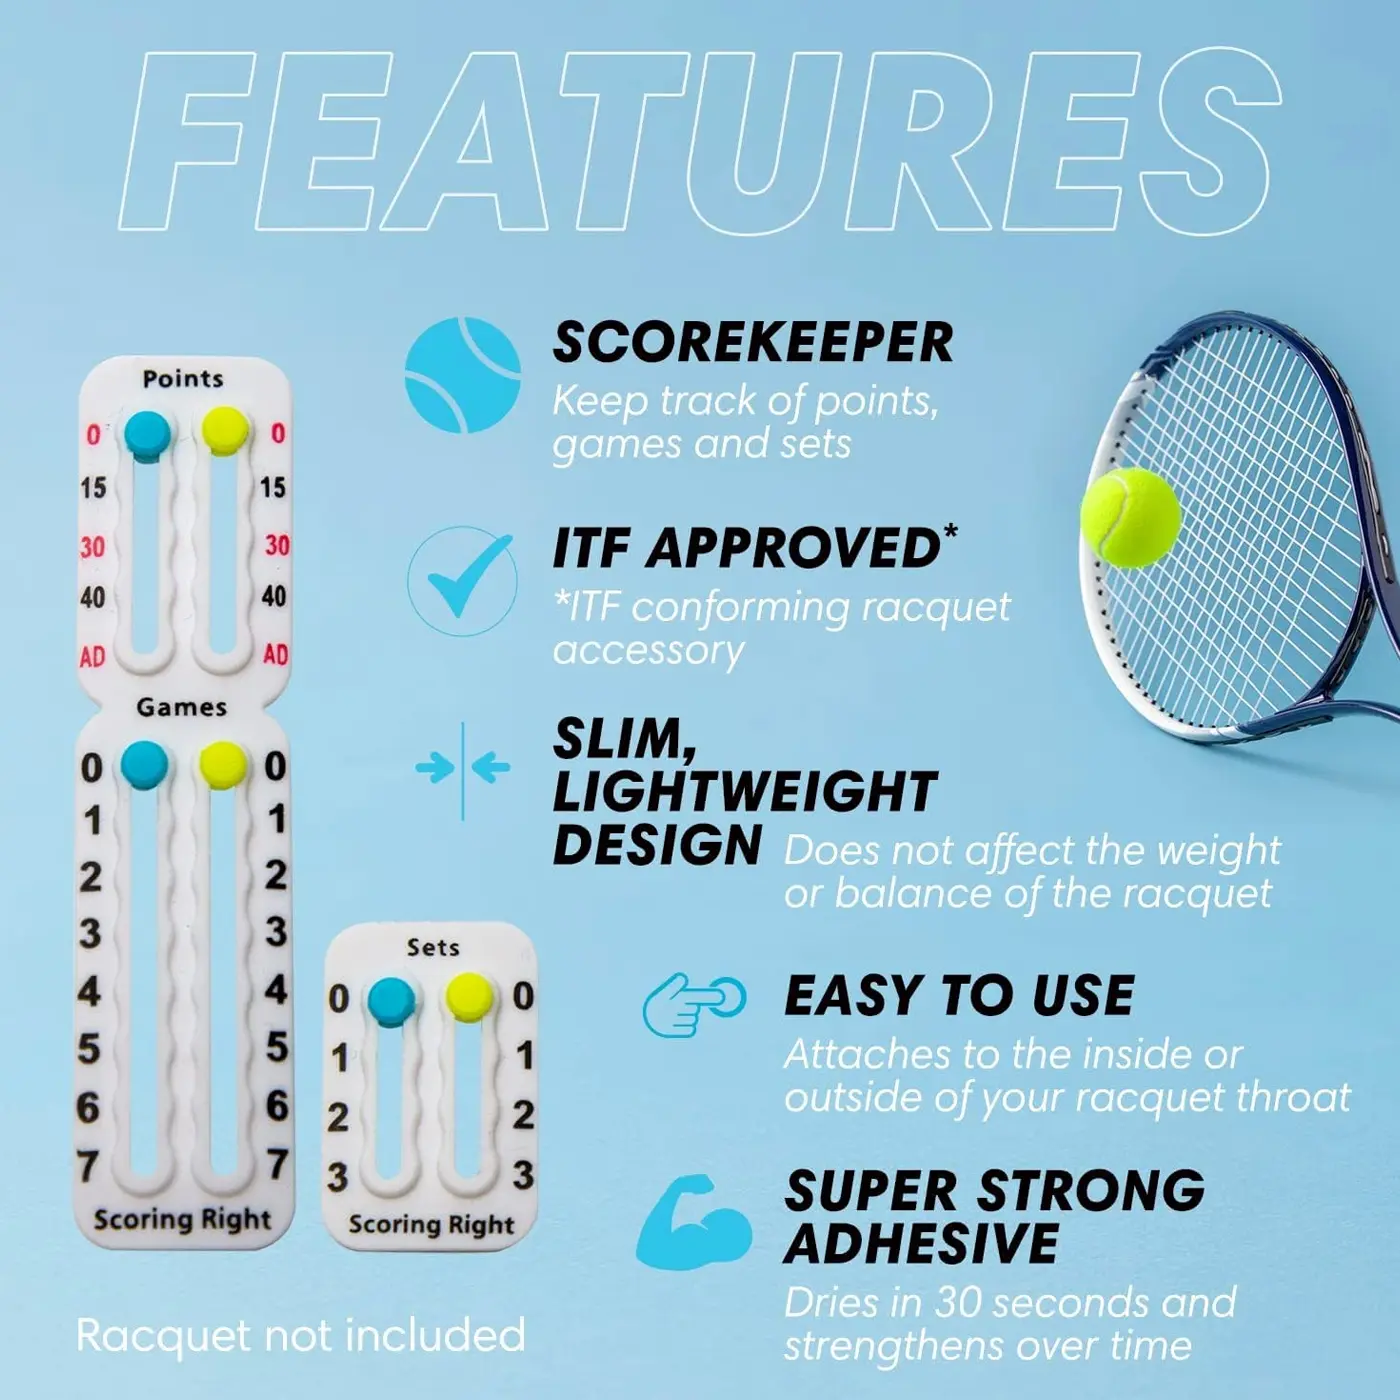 Scoring Right Portable Tennis Racket and Padel Scorekeeper, Easily Mounted Small Score Board to Keep Score of Points, Games, and Sets, ITF Conforming and Lightweight Mini Score Keeper, 1.9g